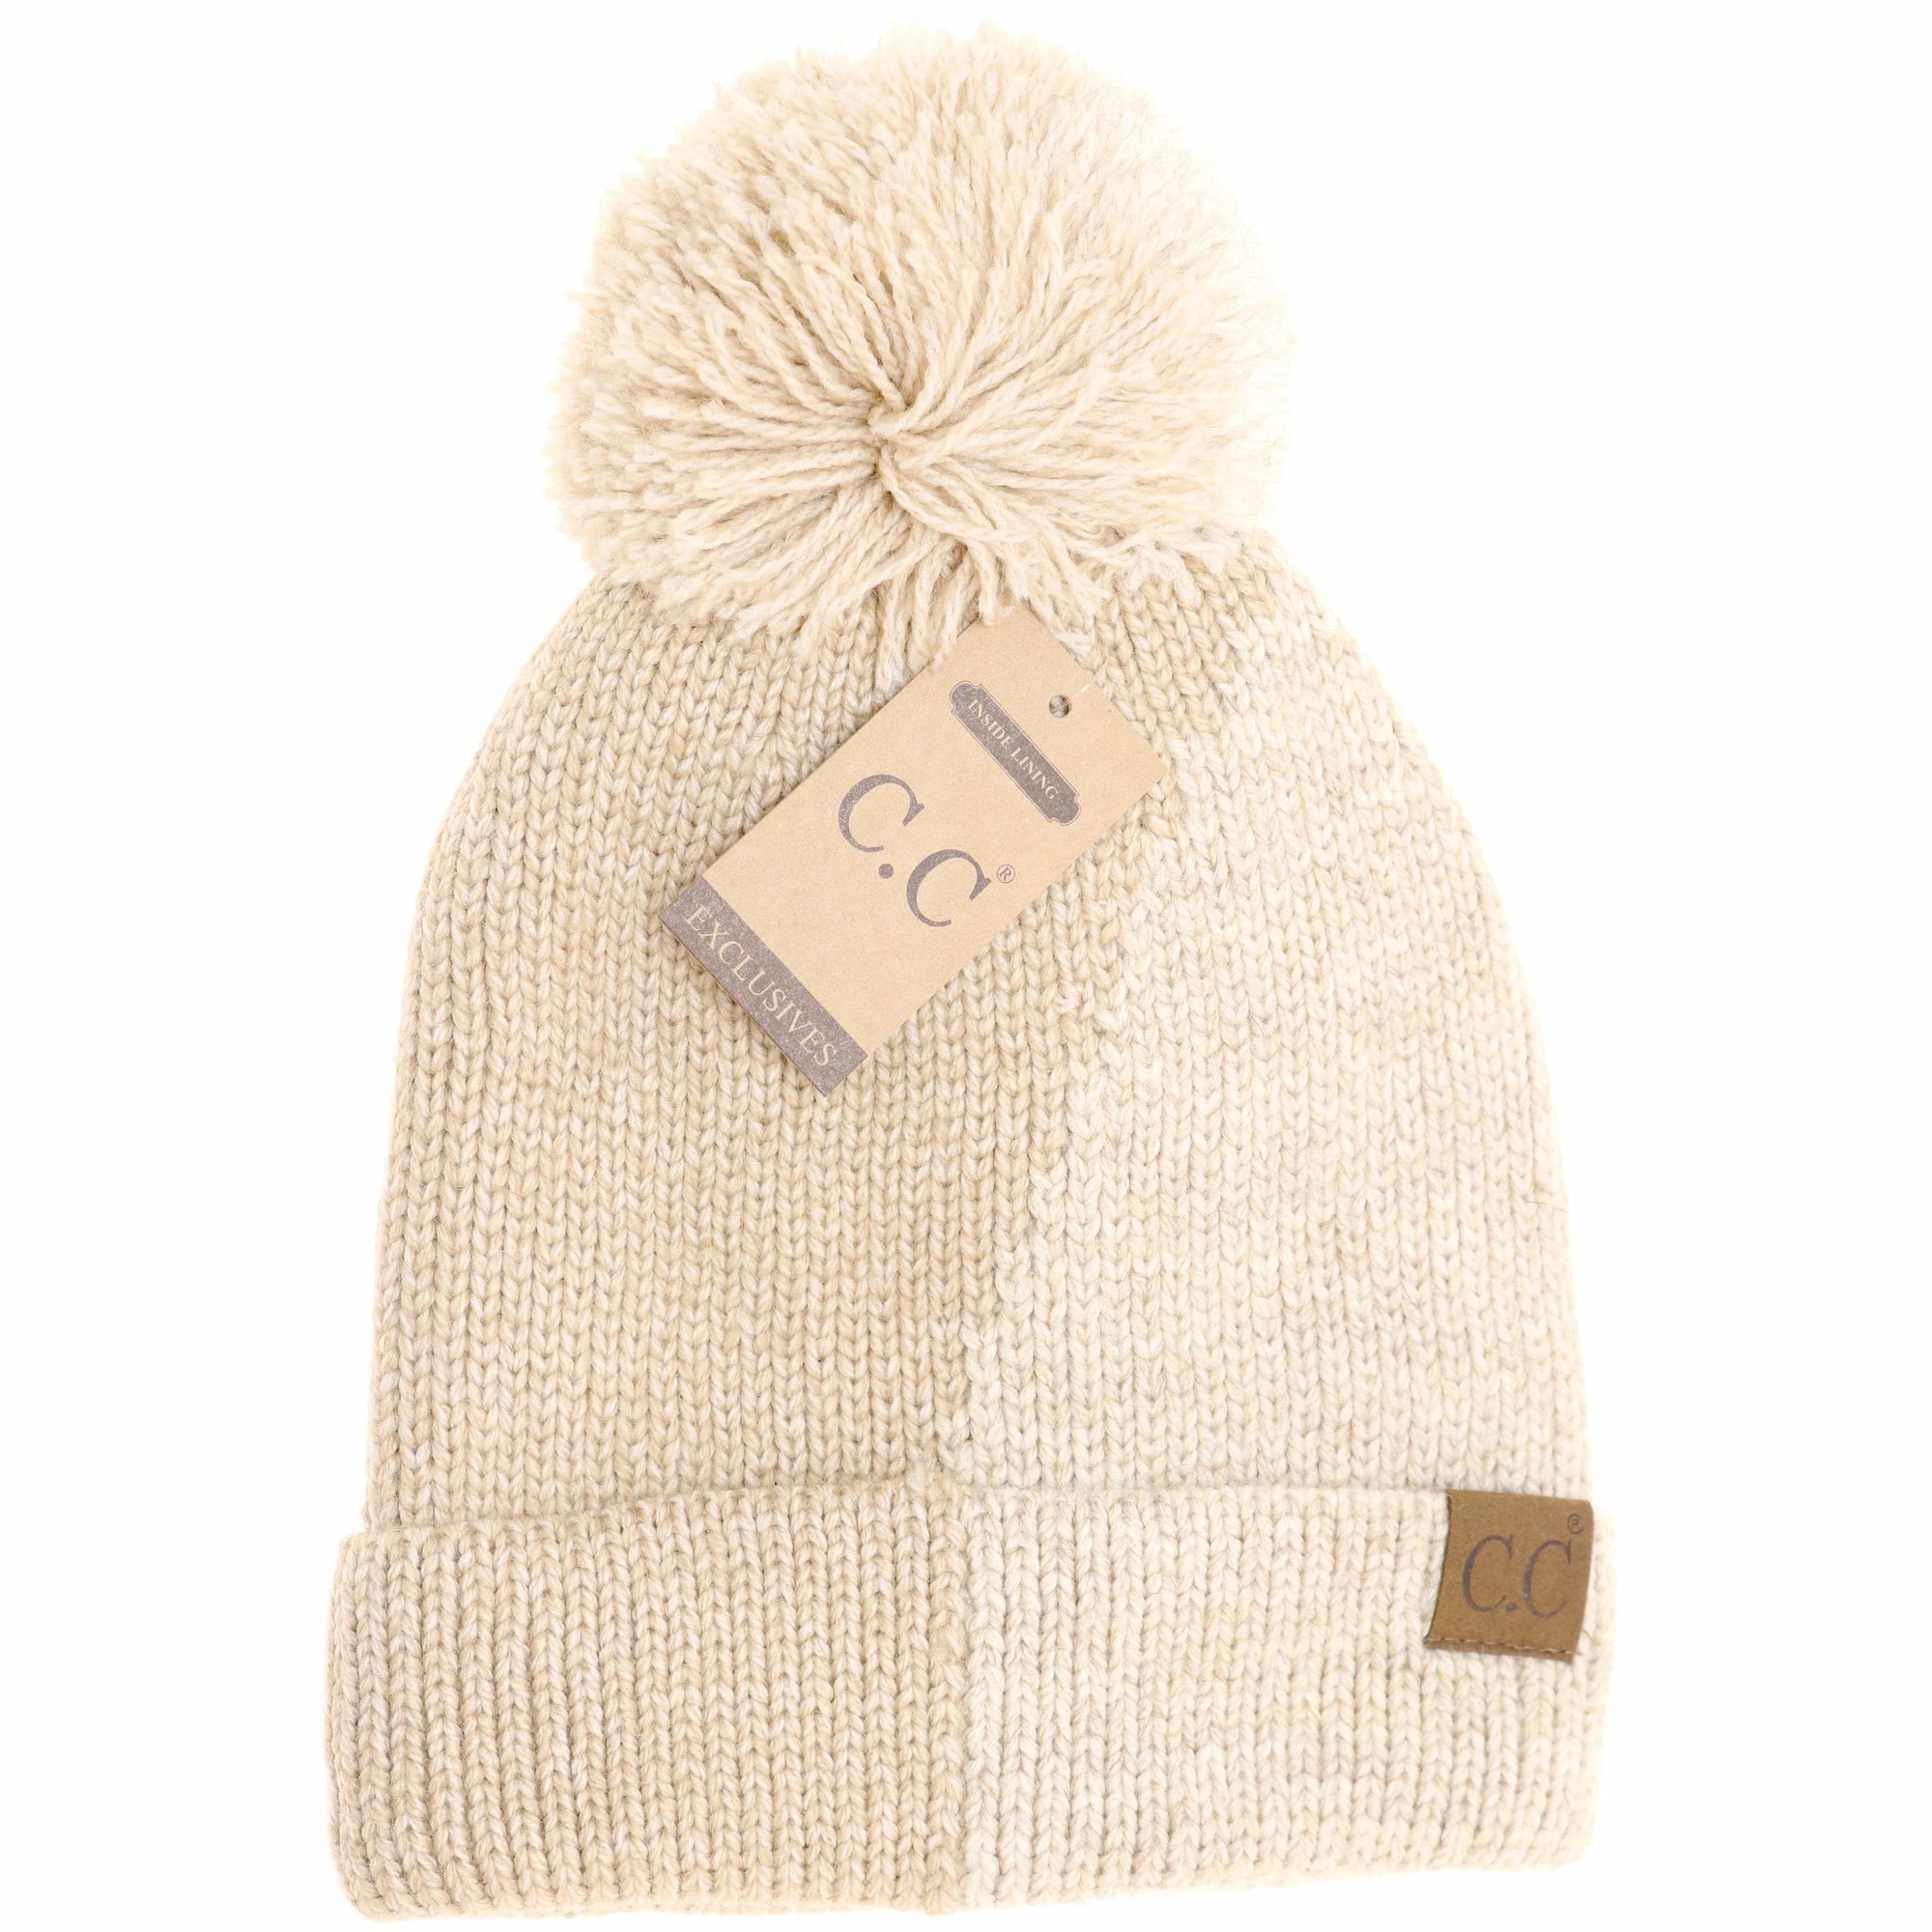 Two Tone Knit Beanie in Taupe